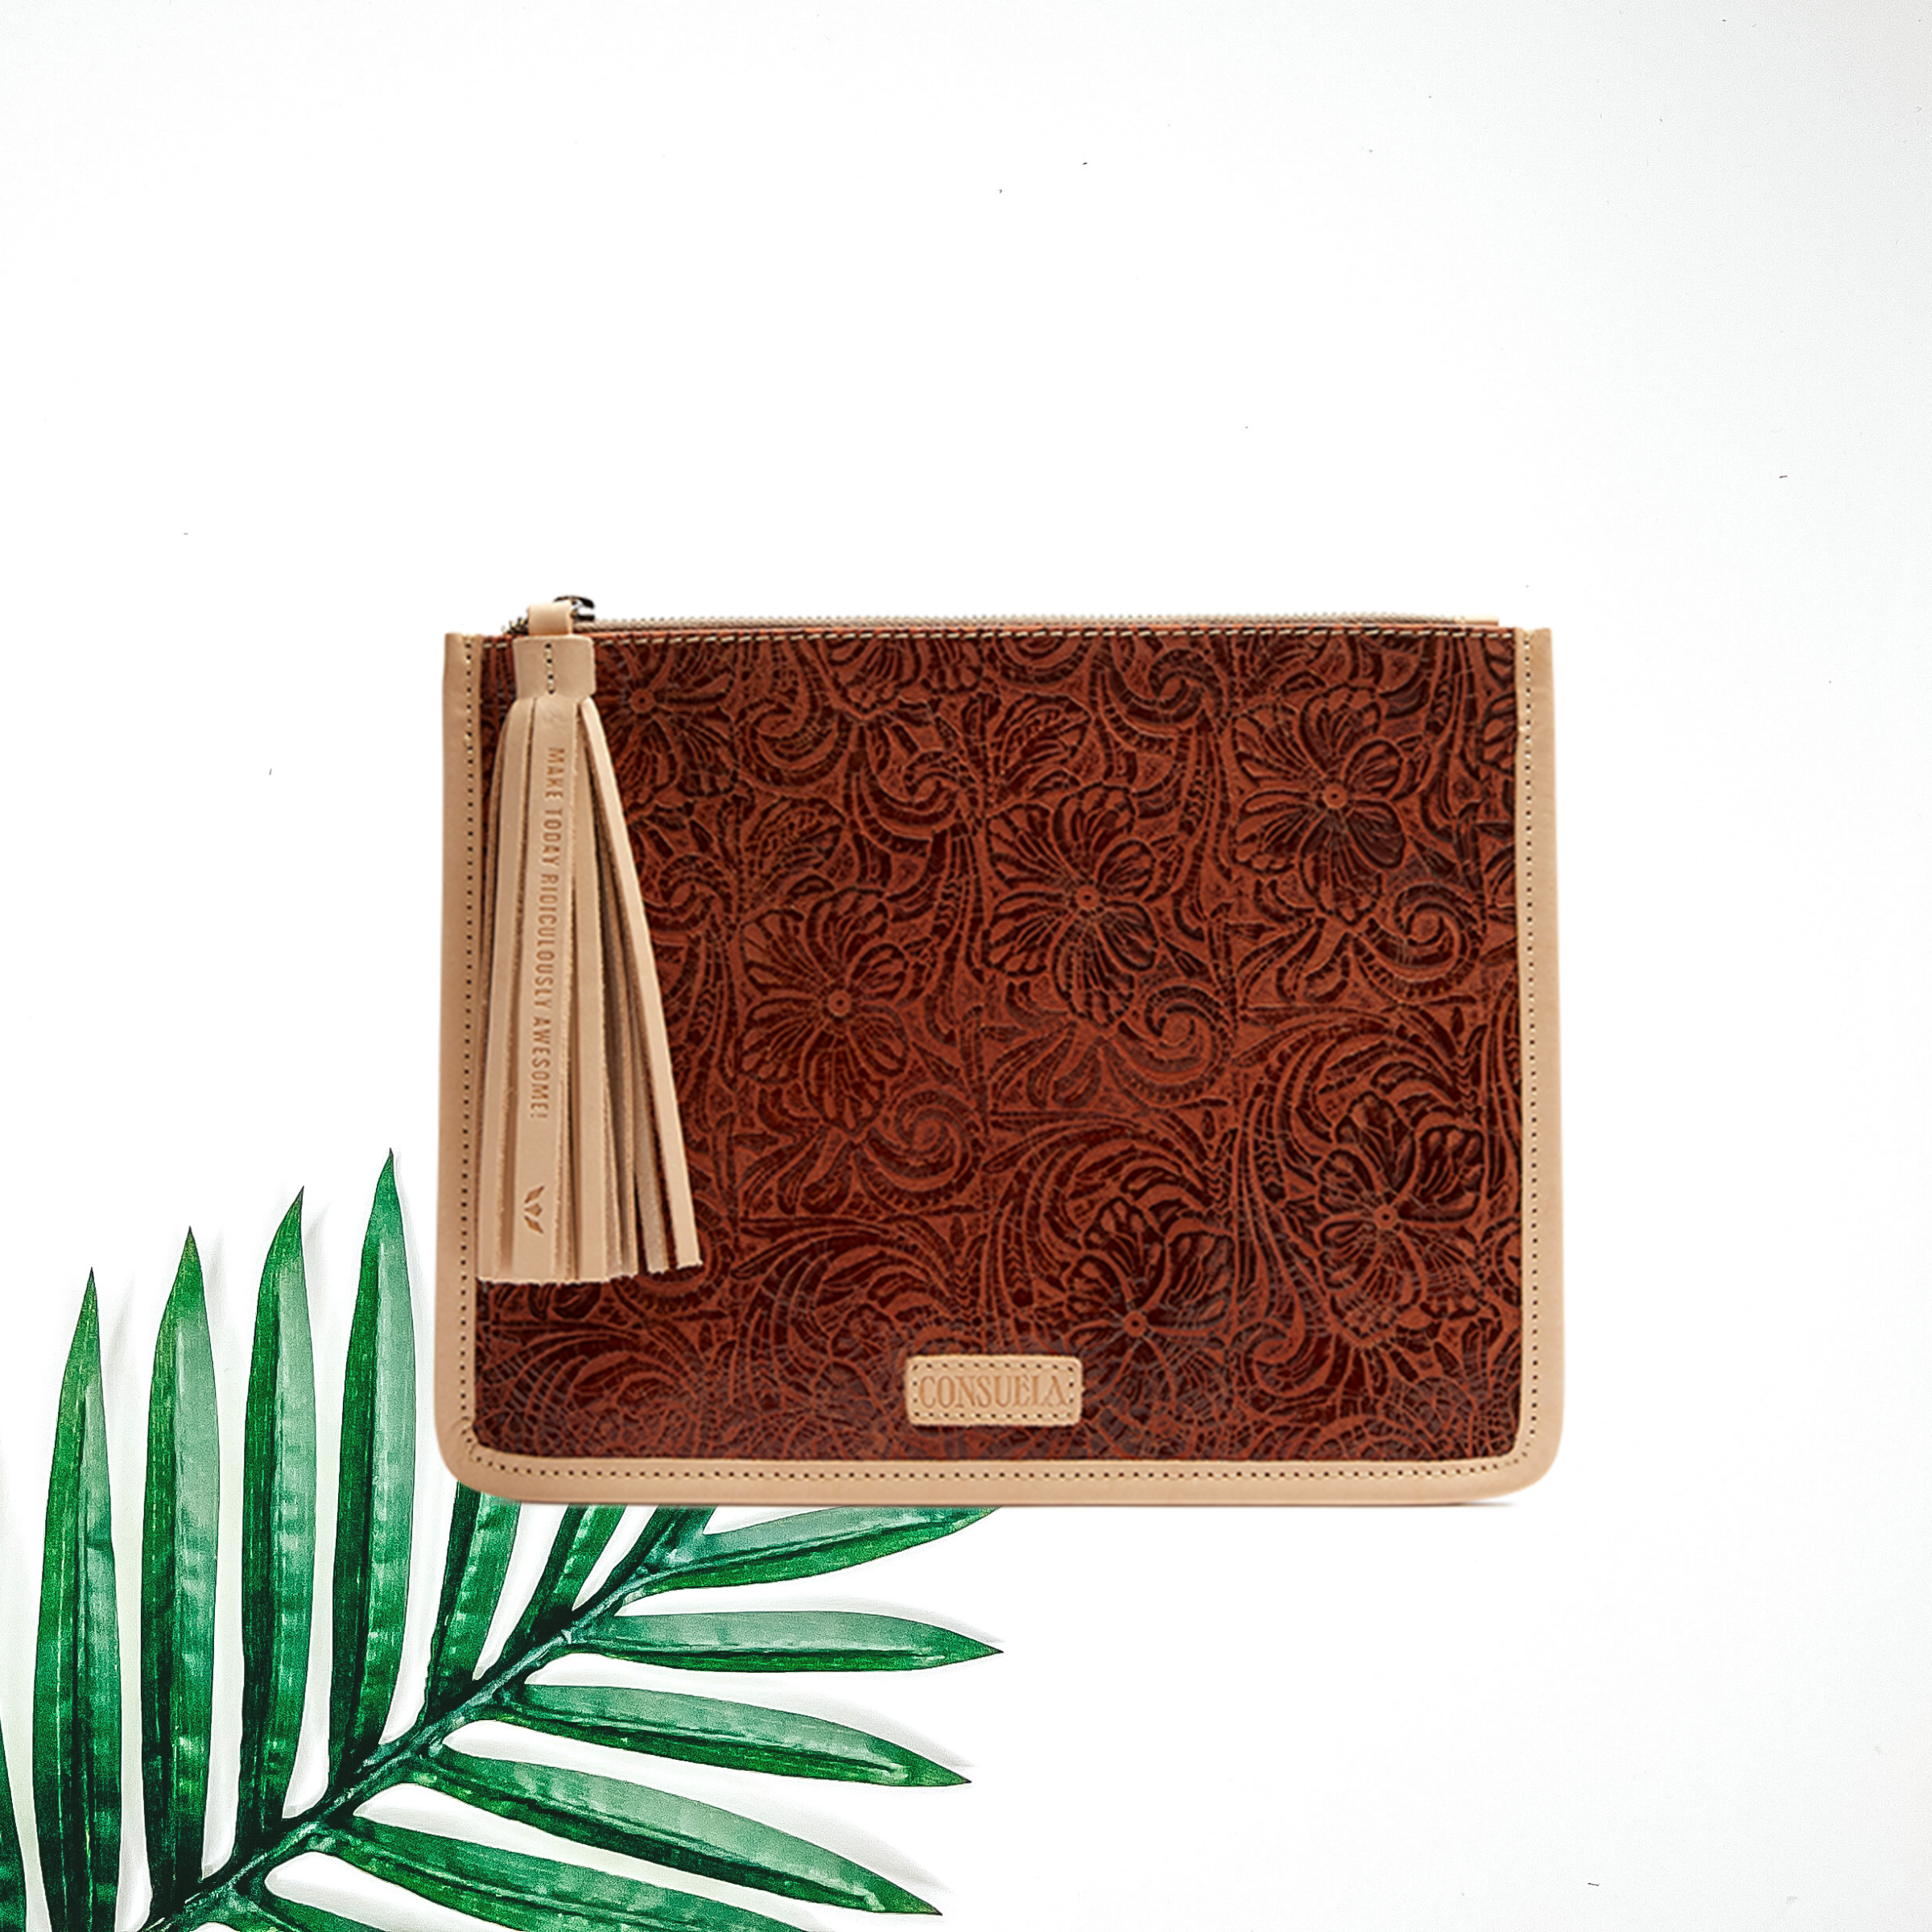 Centered in the picture is a pouch in a brown tooled pattern. To the left of the pouch is a palm leaf, all on a white background.